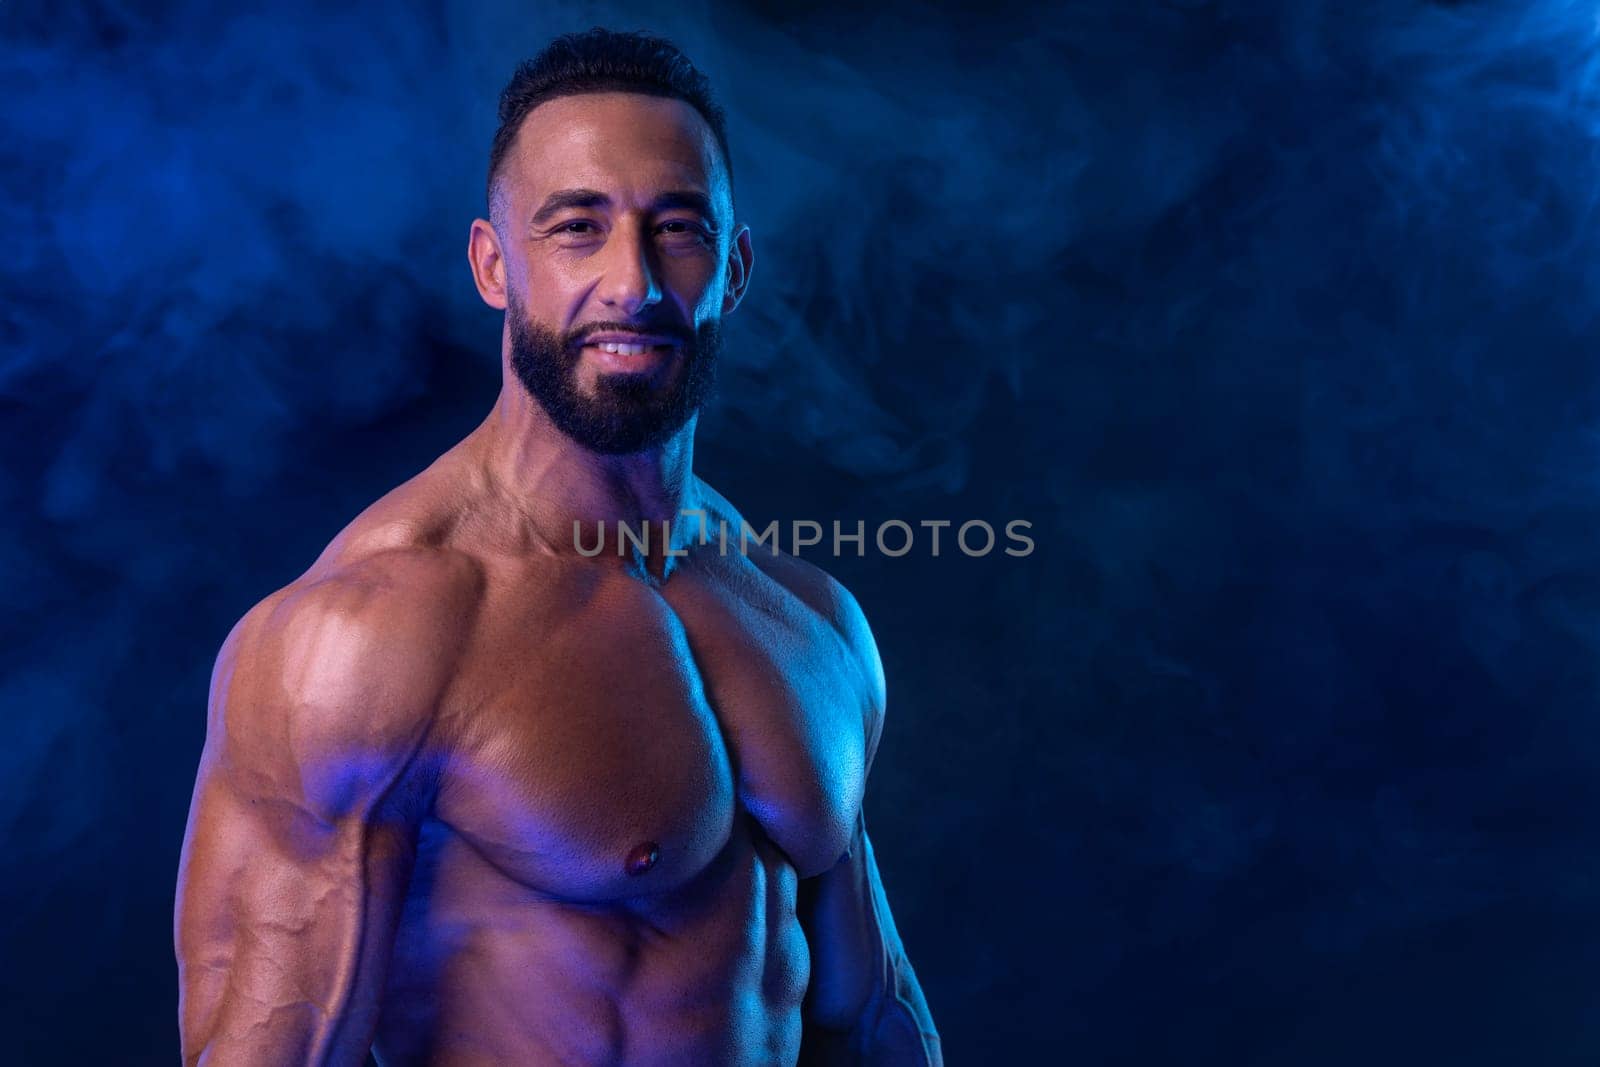 Bodybuilder in neon colors. Athlete man posing on black background. Sports concept. Bodybuilding competition. Social media template.